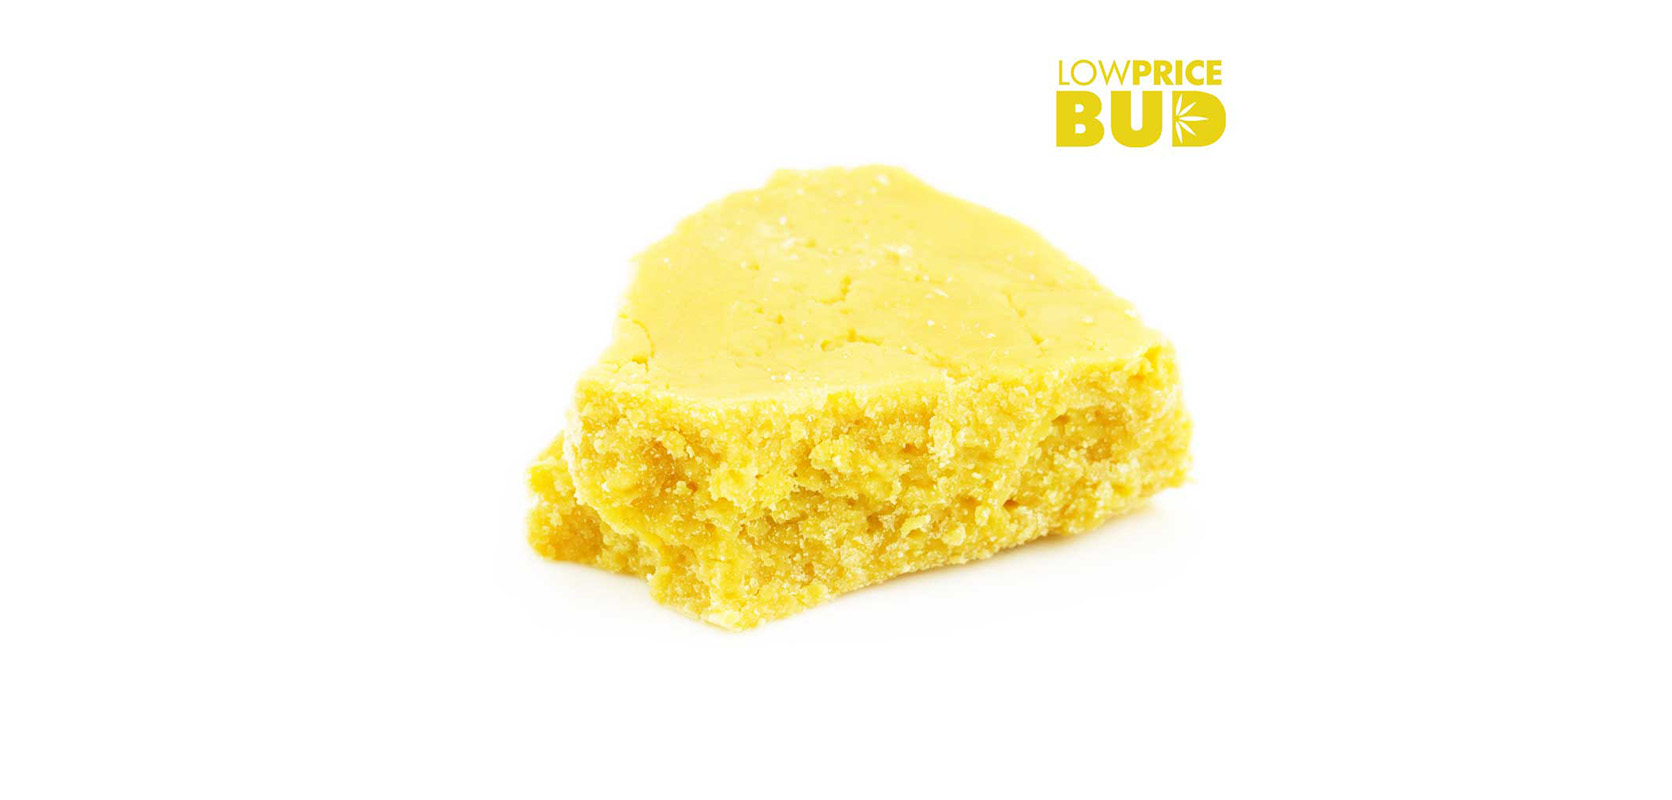 Ice Cream Cake Strain Weed Budder. Buy cannabis concentrates online. Buy weed online in Canada.